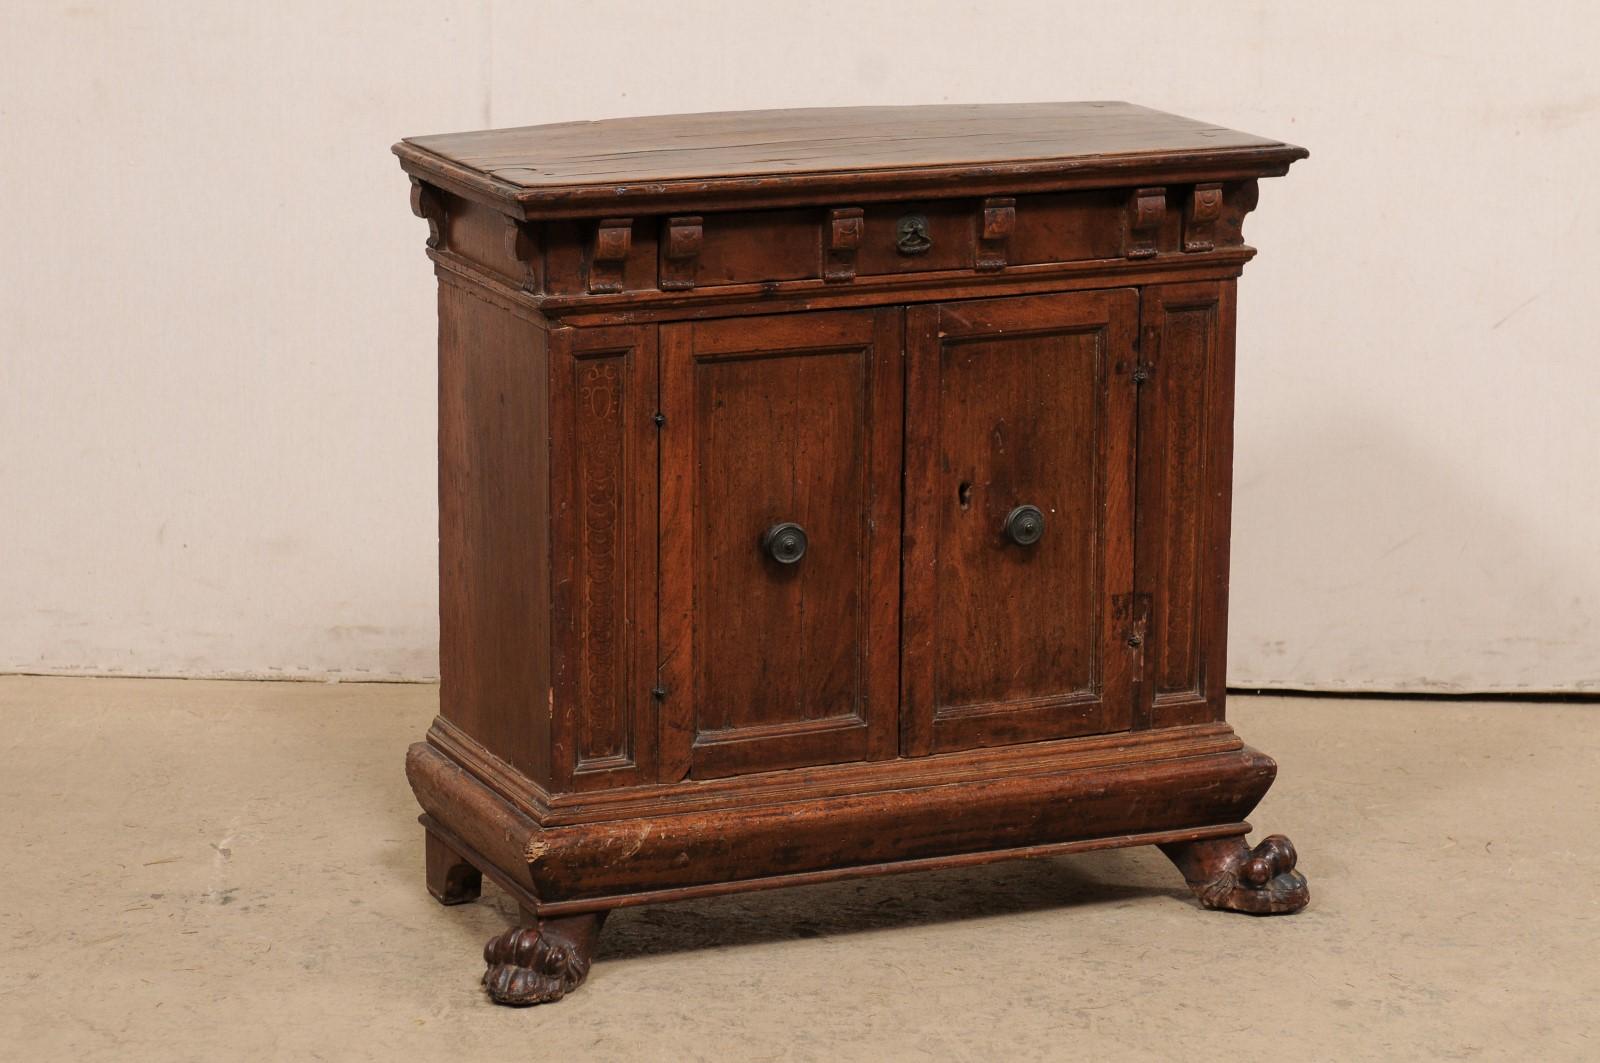 An Italian walnut two-door cabinet from the early 18th century. This antique cabinet from Italy features a rectangular-shaped top, with handsome bracket-style carvings adorning it's underside, atop a case which houses a top drawer (which is hidden